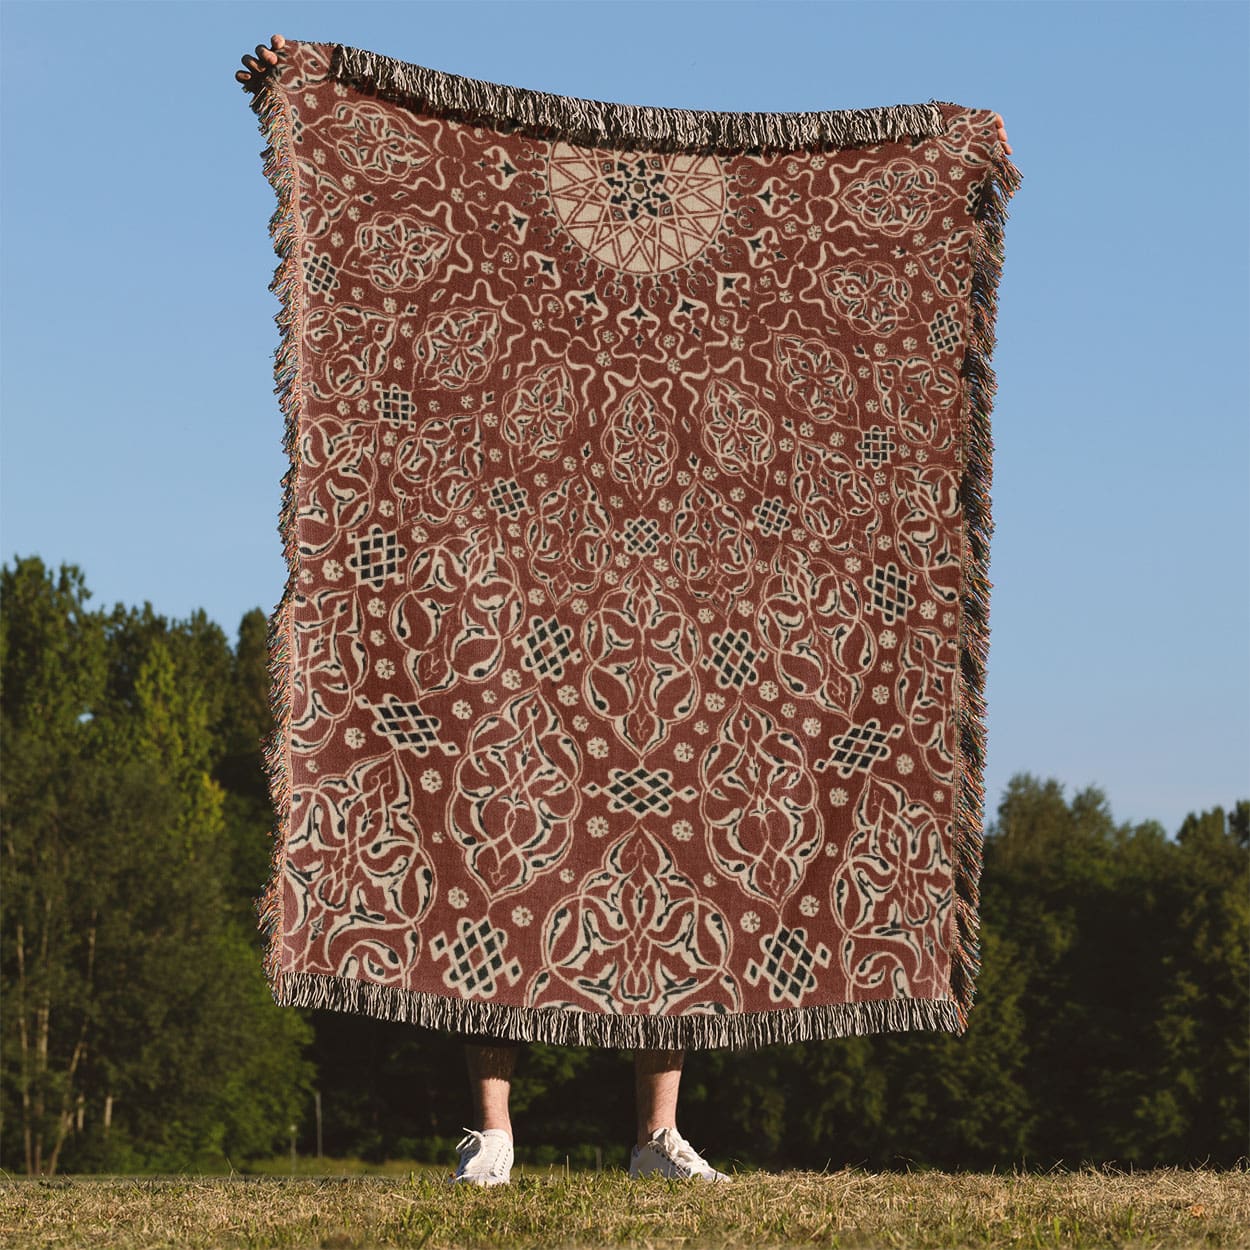 Bright Red Pattern Woven Blanket Held Up Outside